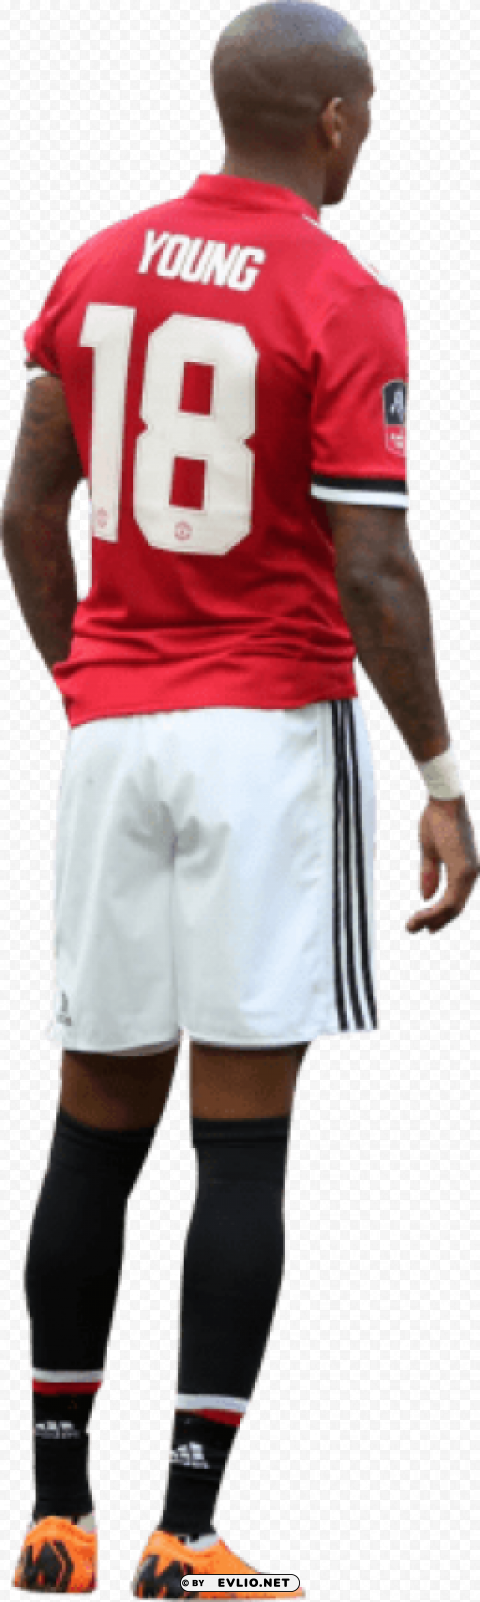 ashley young Isolated PNG Image with Transparent Background